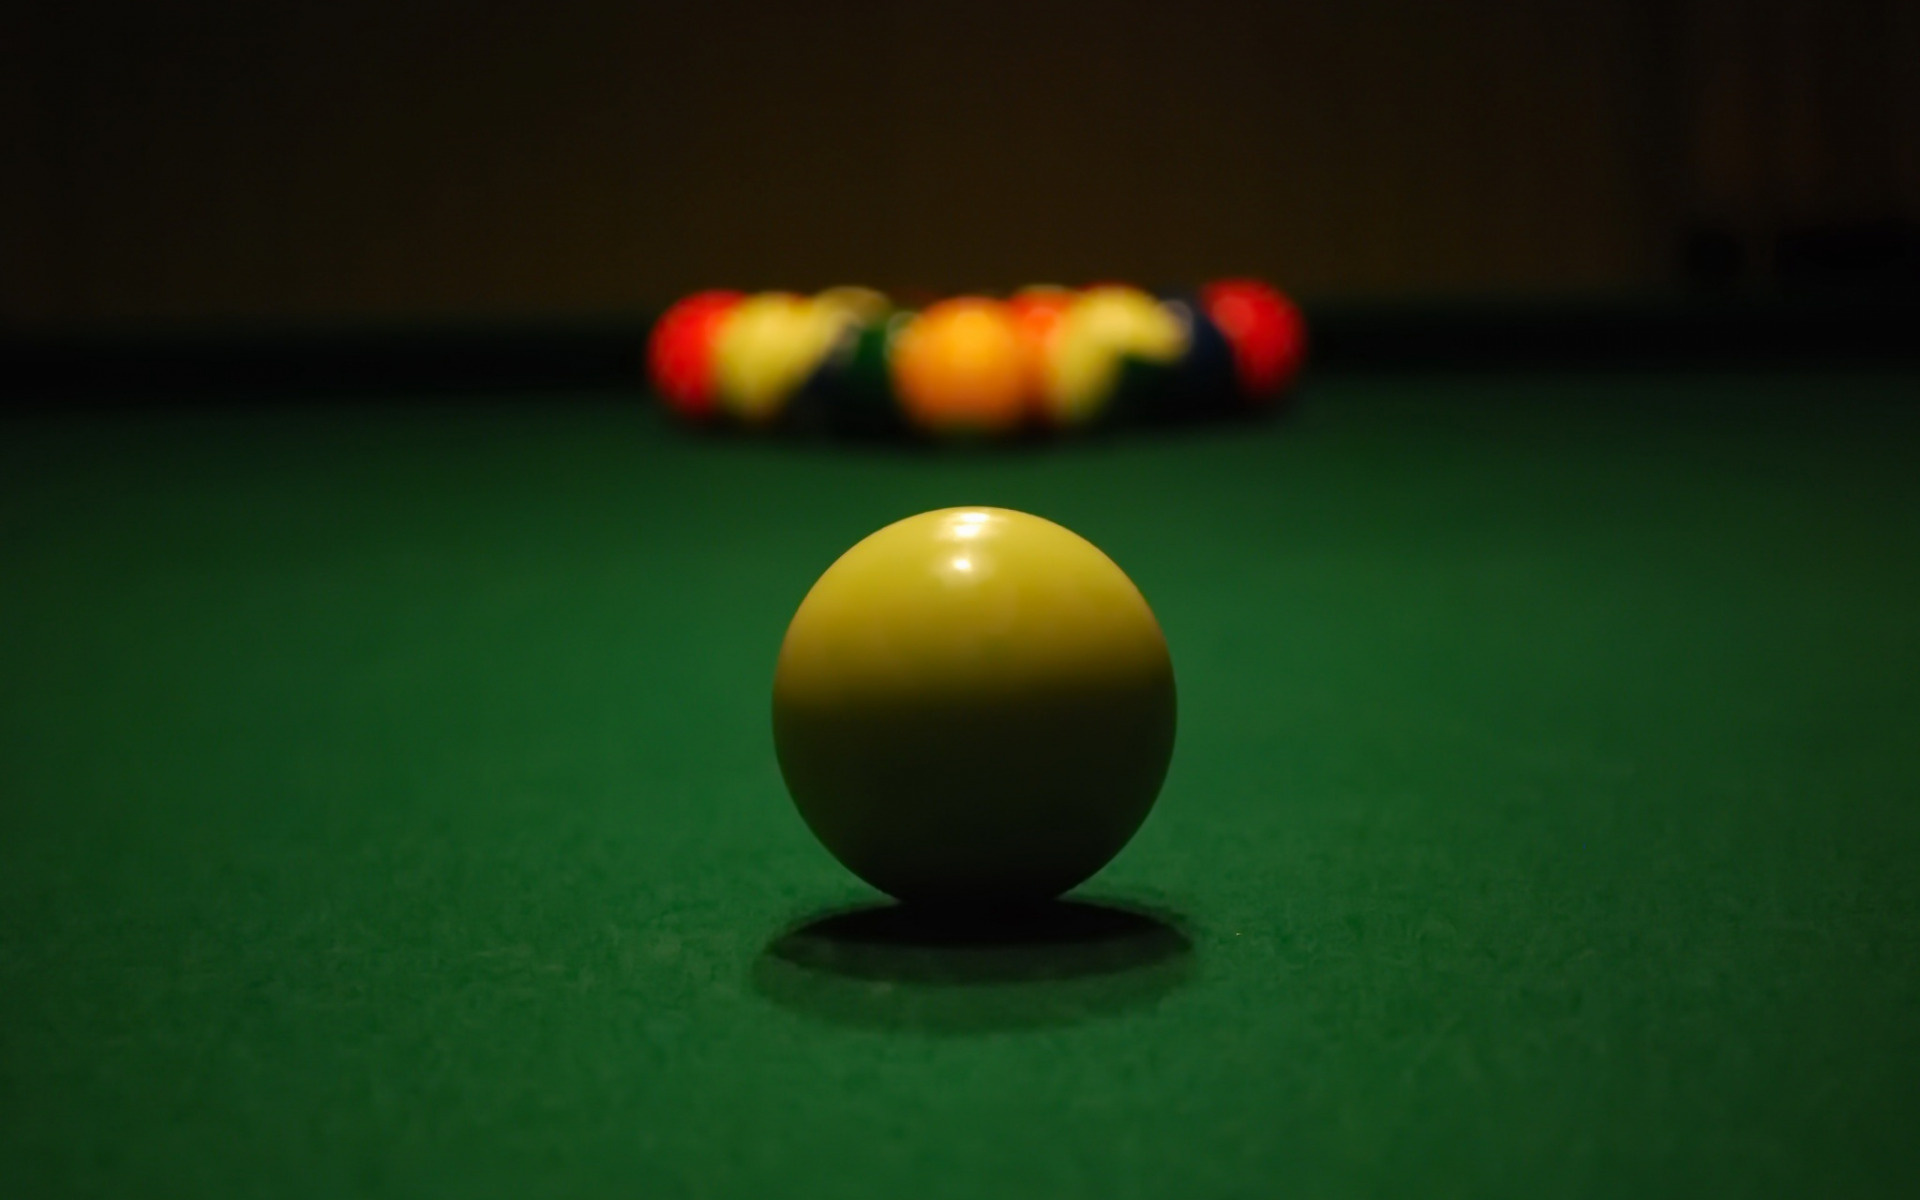 Billiards: A white cue ball before the break shot in a classic eightball type of a recreational sport. 1920x1200 HD Background.